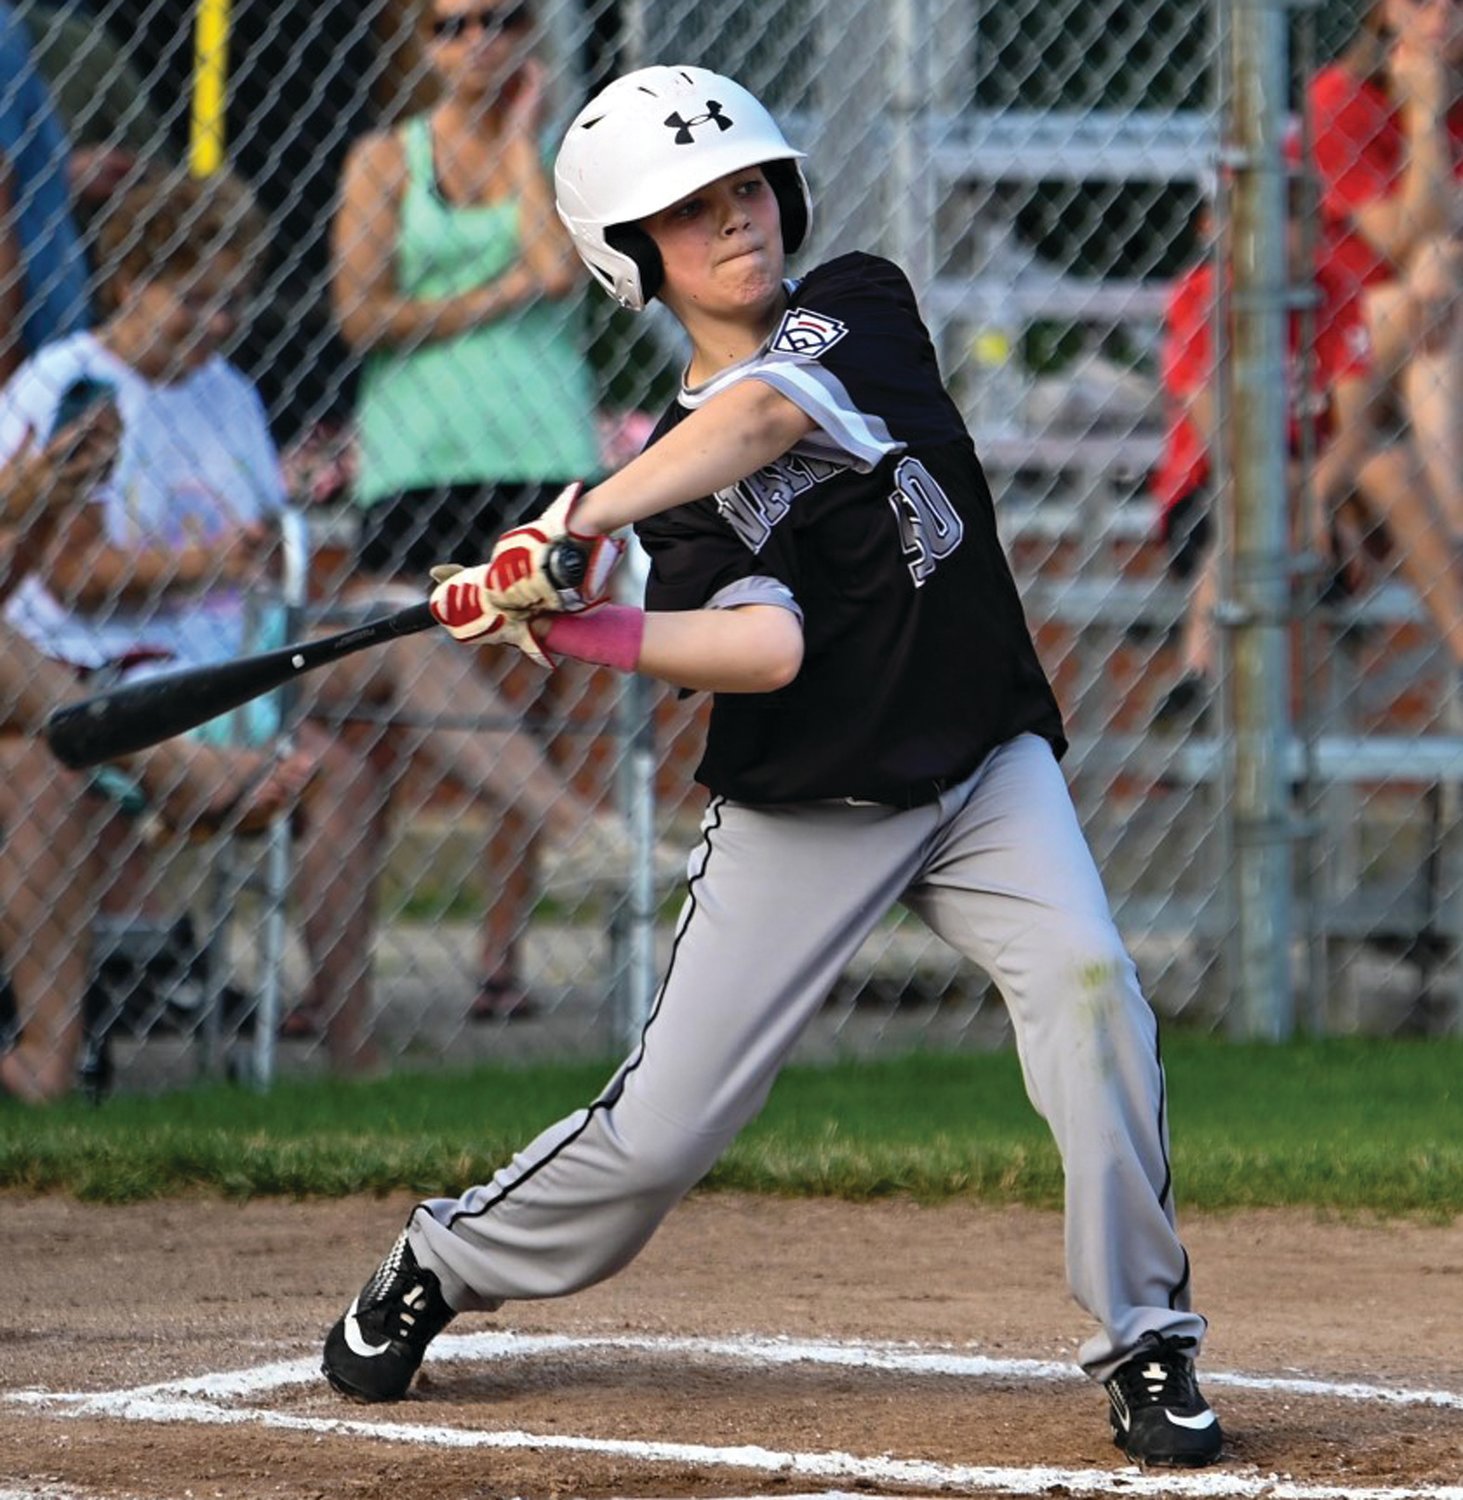 SWINGING AWAY: North’s Jamison O’Dea takes a swing while up to bat against Coventry.